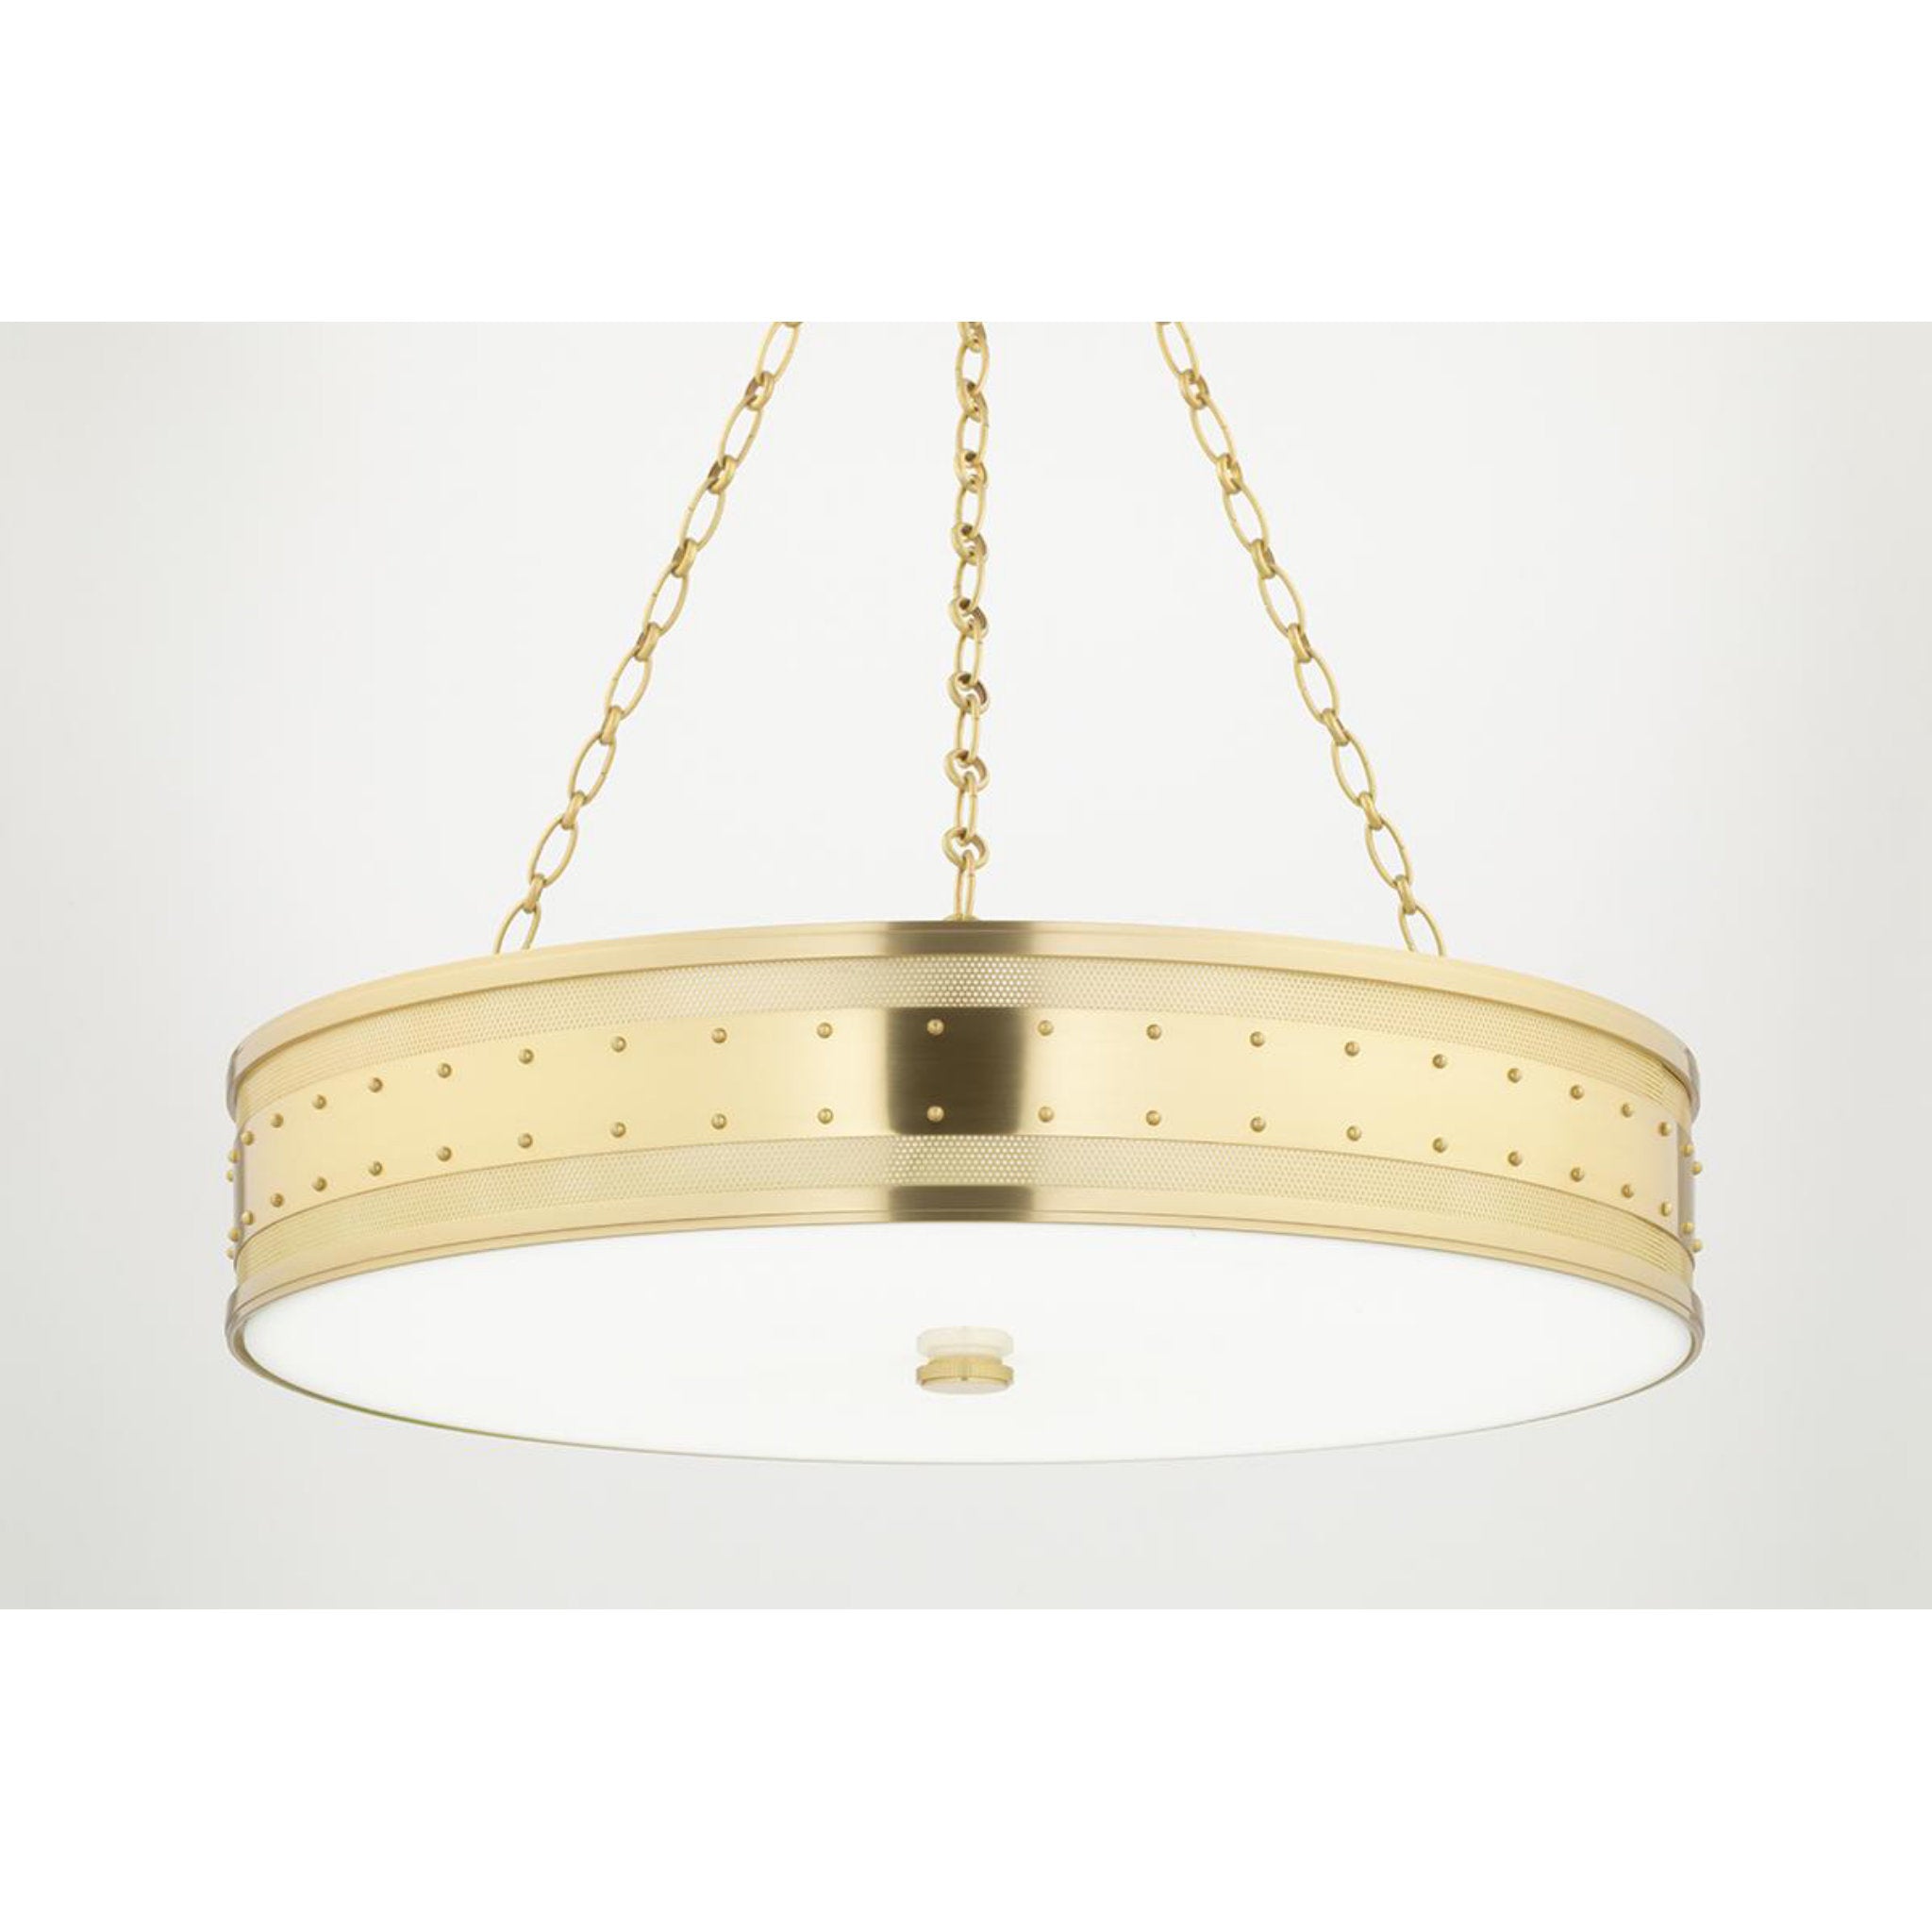 Gaines 4 Light Chandelier in Aged Old Bronze